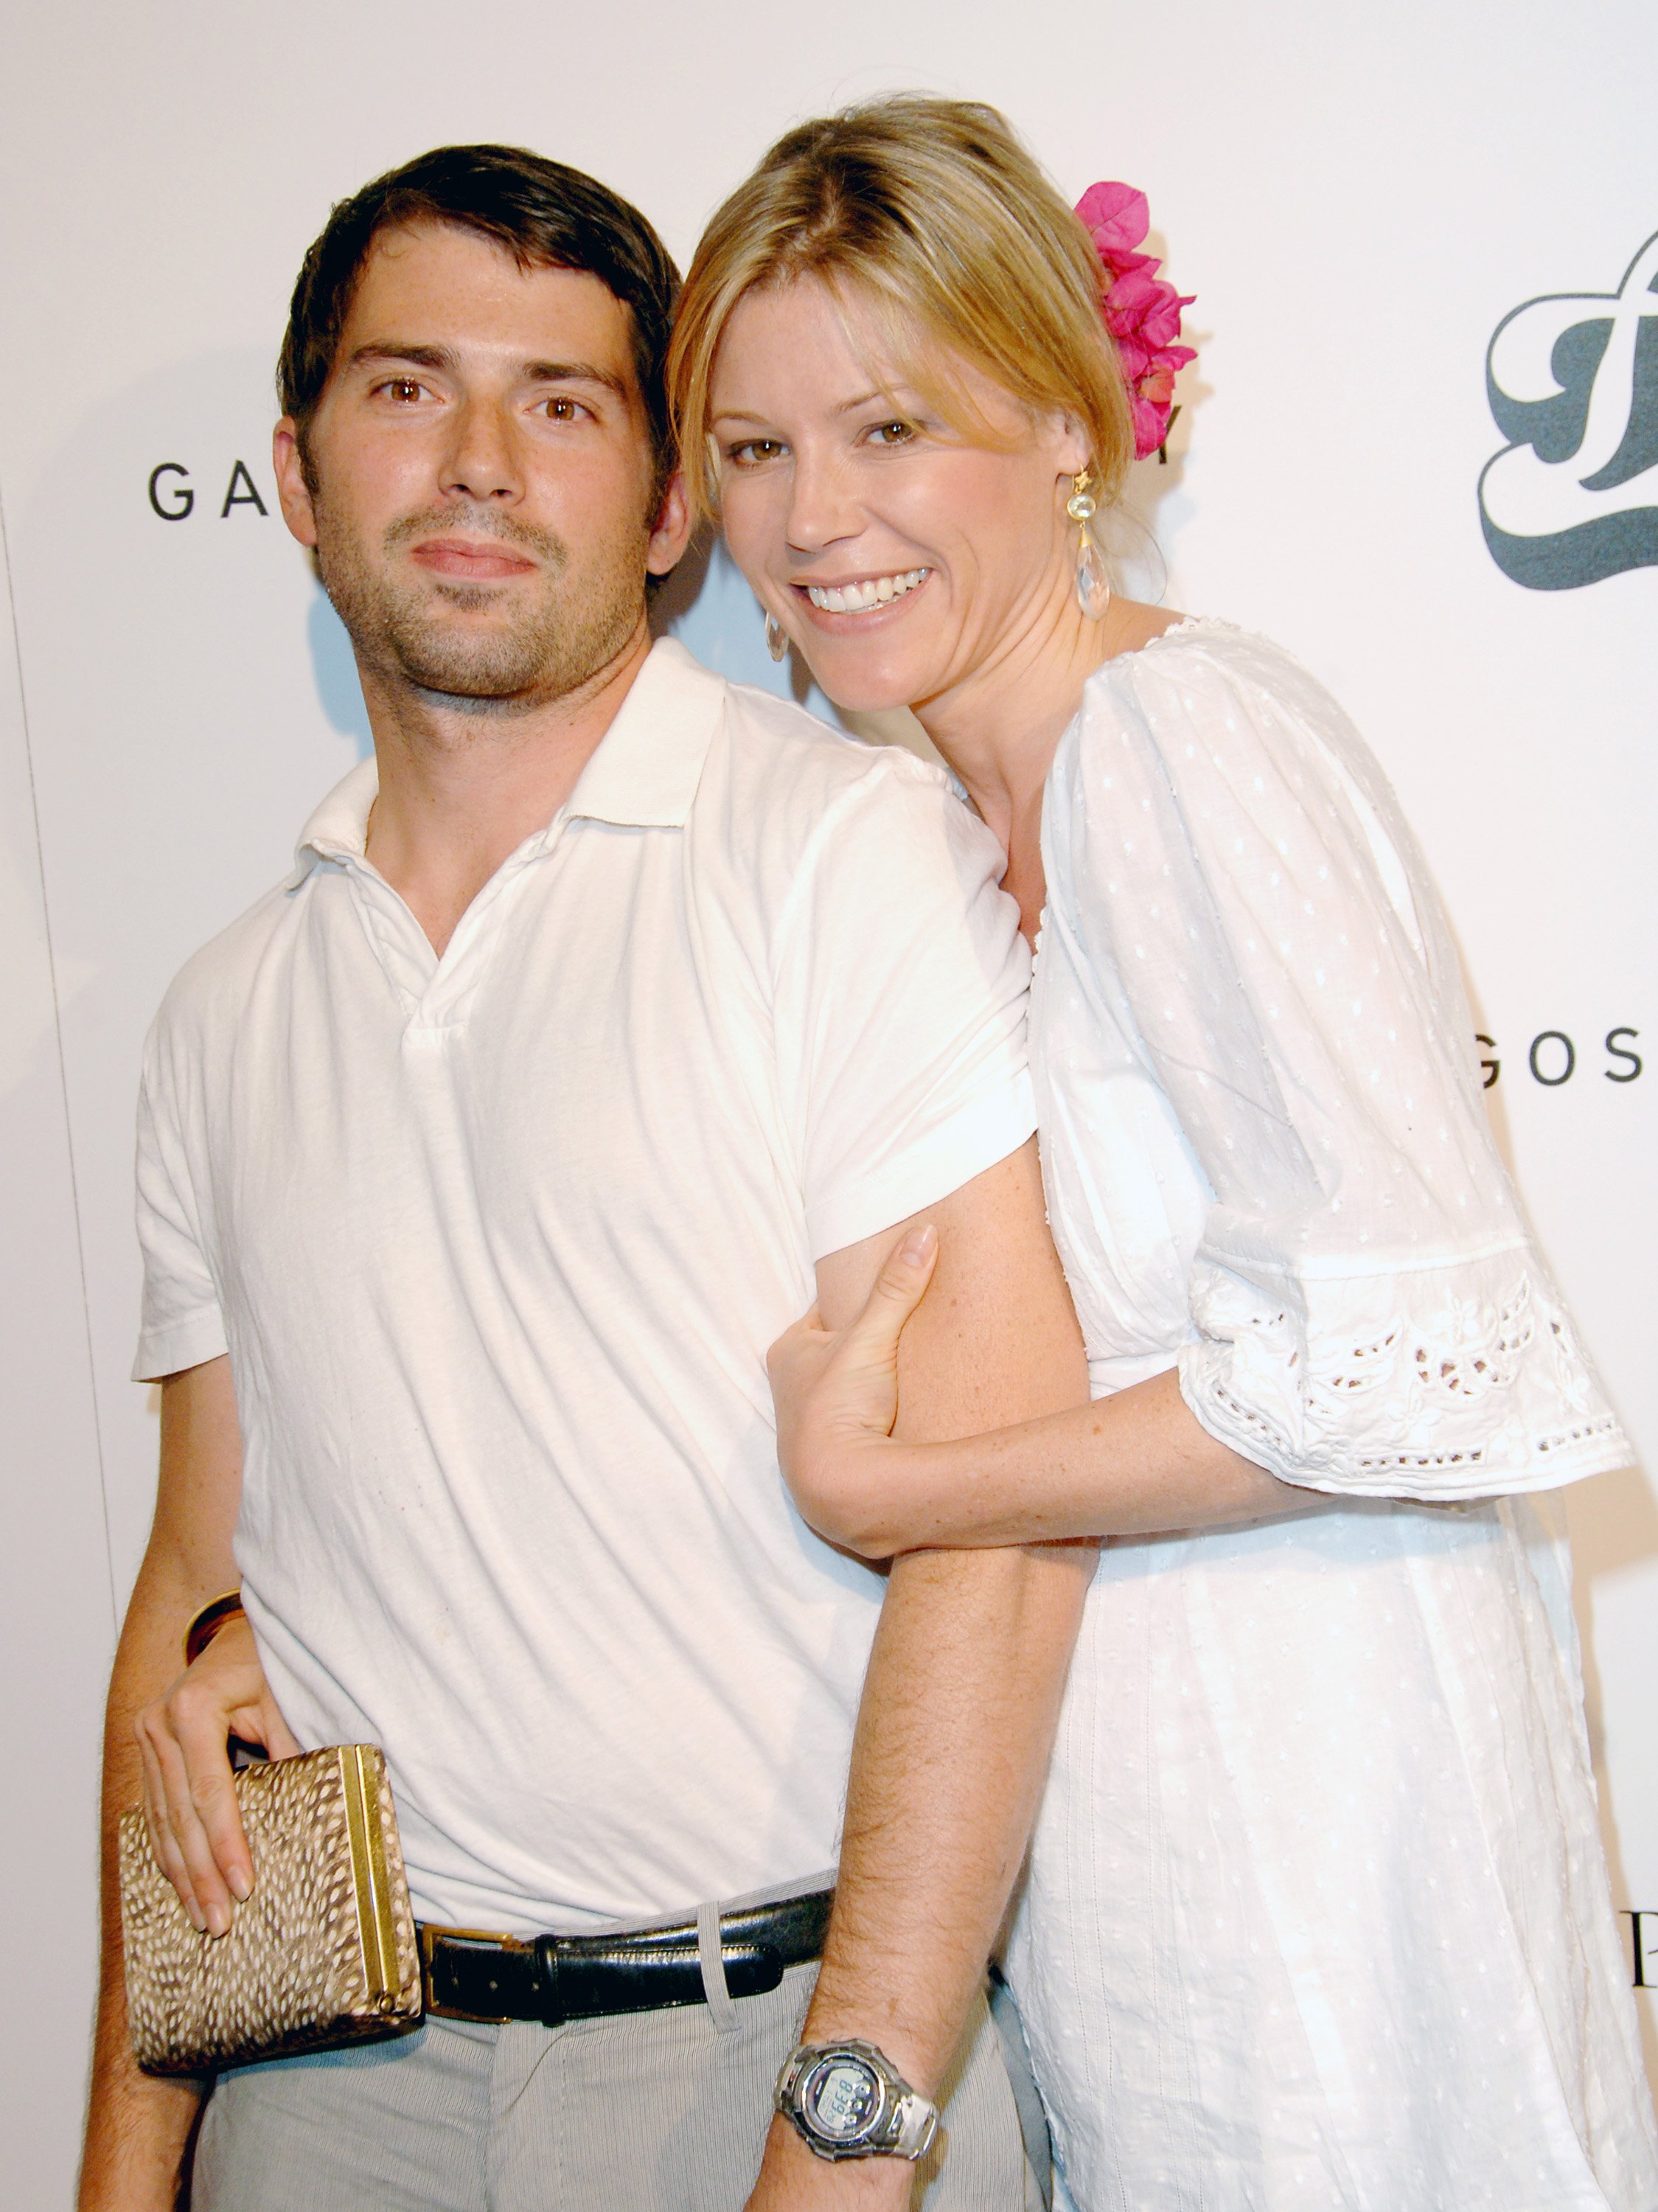 Julie Bowen and ex-husband Scott Phillips at the 2006 Hollywood and Fashion Unite for The Inaugural "Kid Art Event: A Benefit for P.S. Arts" in California | Source: Getty Images